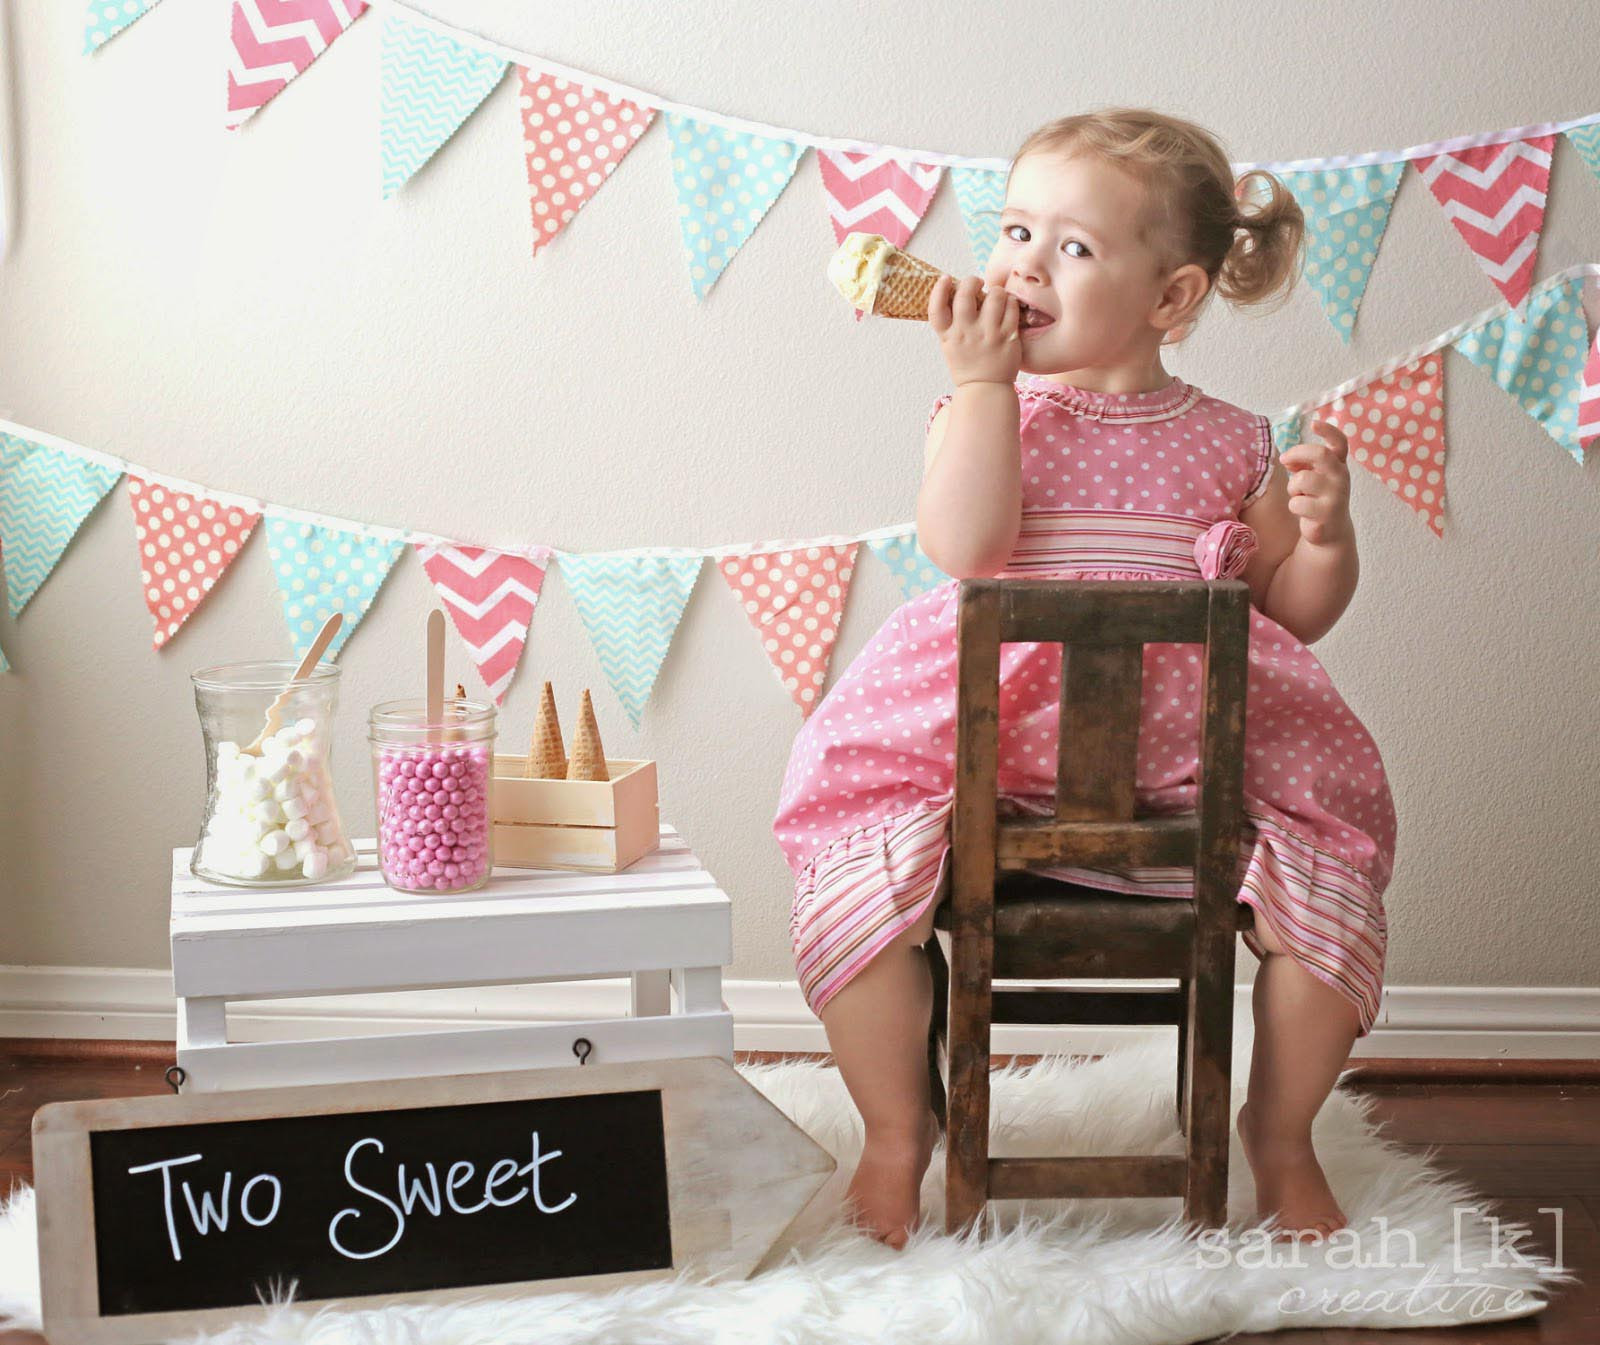 Birthday Party Ideas For 2 Year Old
 Toddler Party Games 2 Year Olds